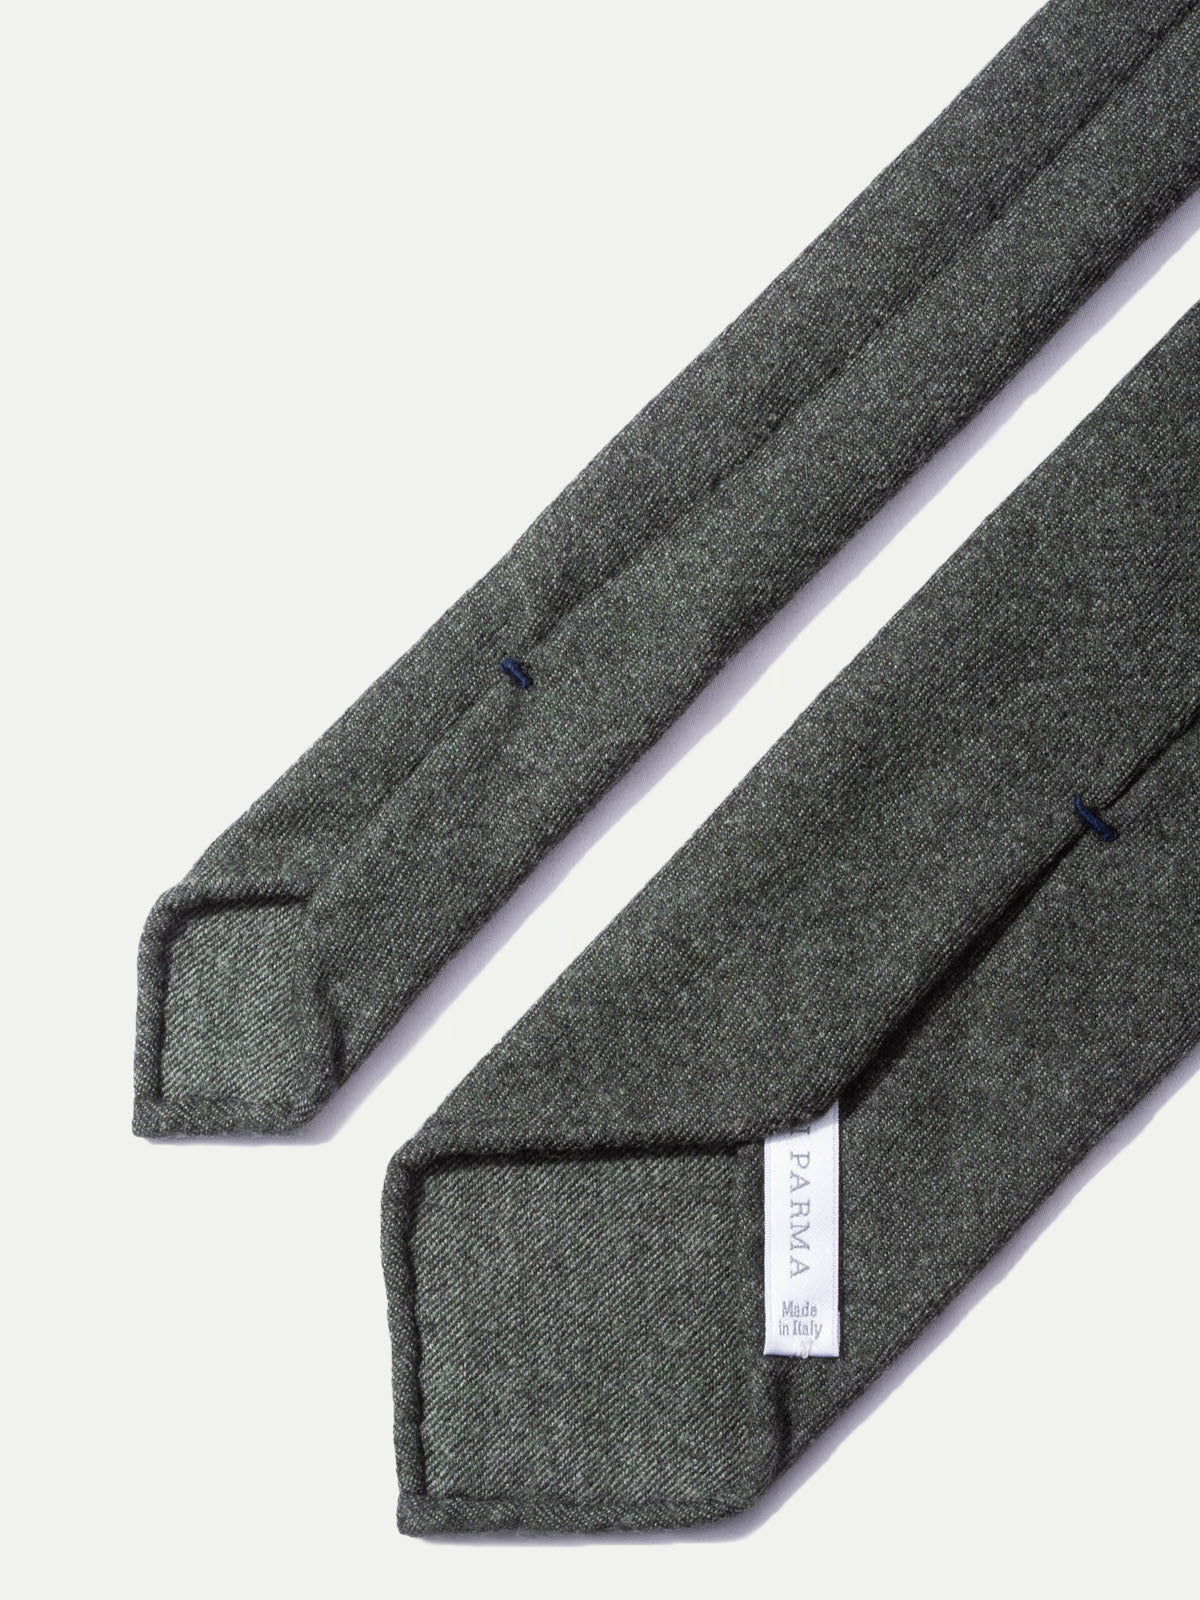 Dark green flannel tie - Hand Made In Italy